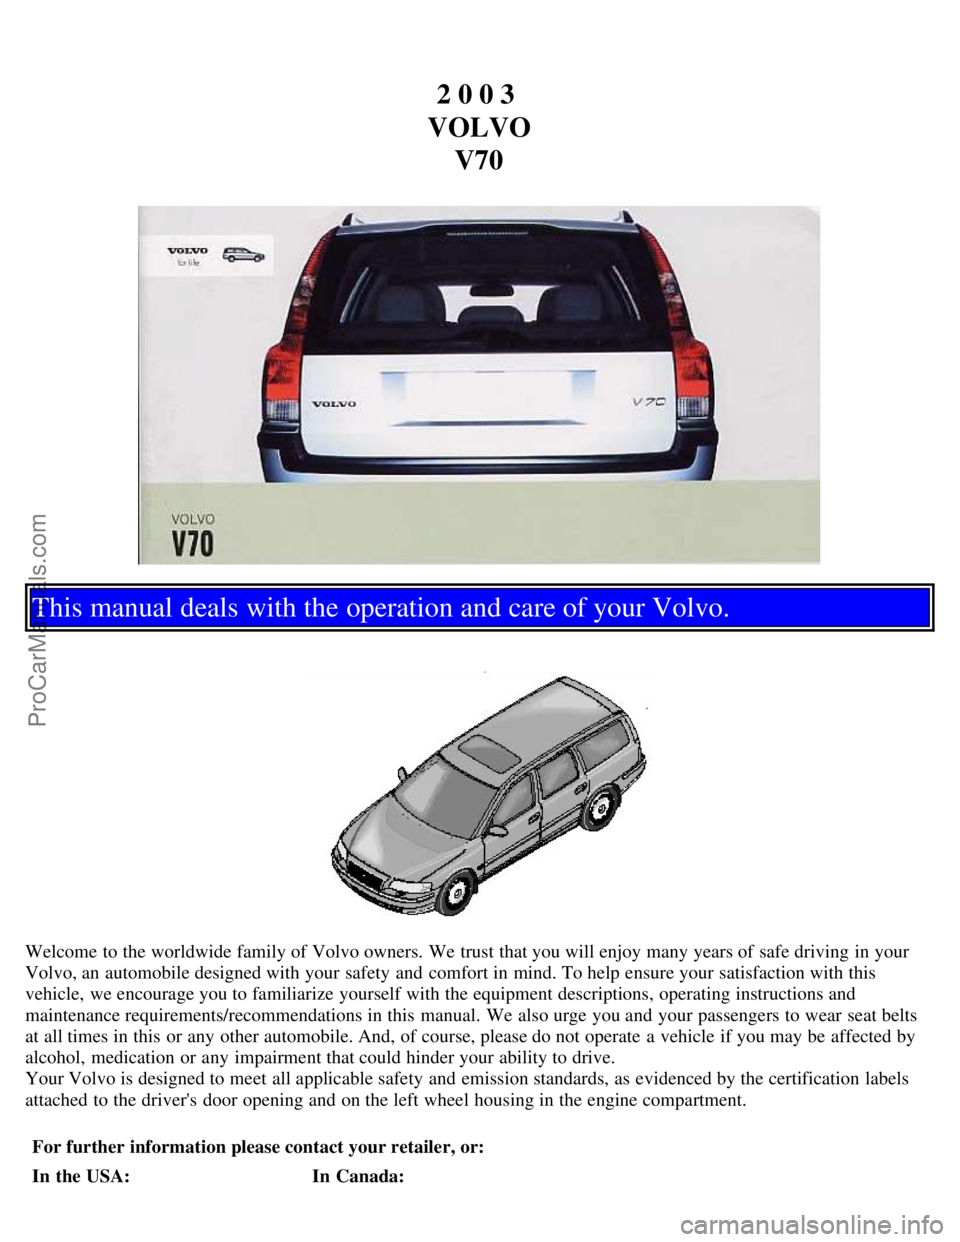 VOLVO V70 2003  Owners Manual 2 0 0 3 
VOLVO V70
This manual deals with the operation and care of your Volvo.
Welcome to the worldwide family of Volvo owners. We trust that you will enjoy many years of safe driving in your
Volvo, 